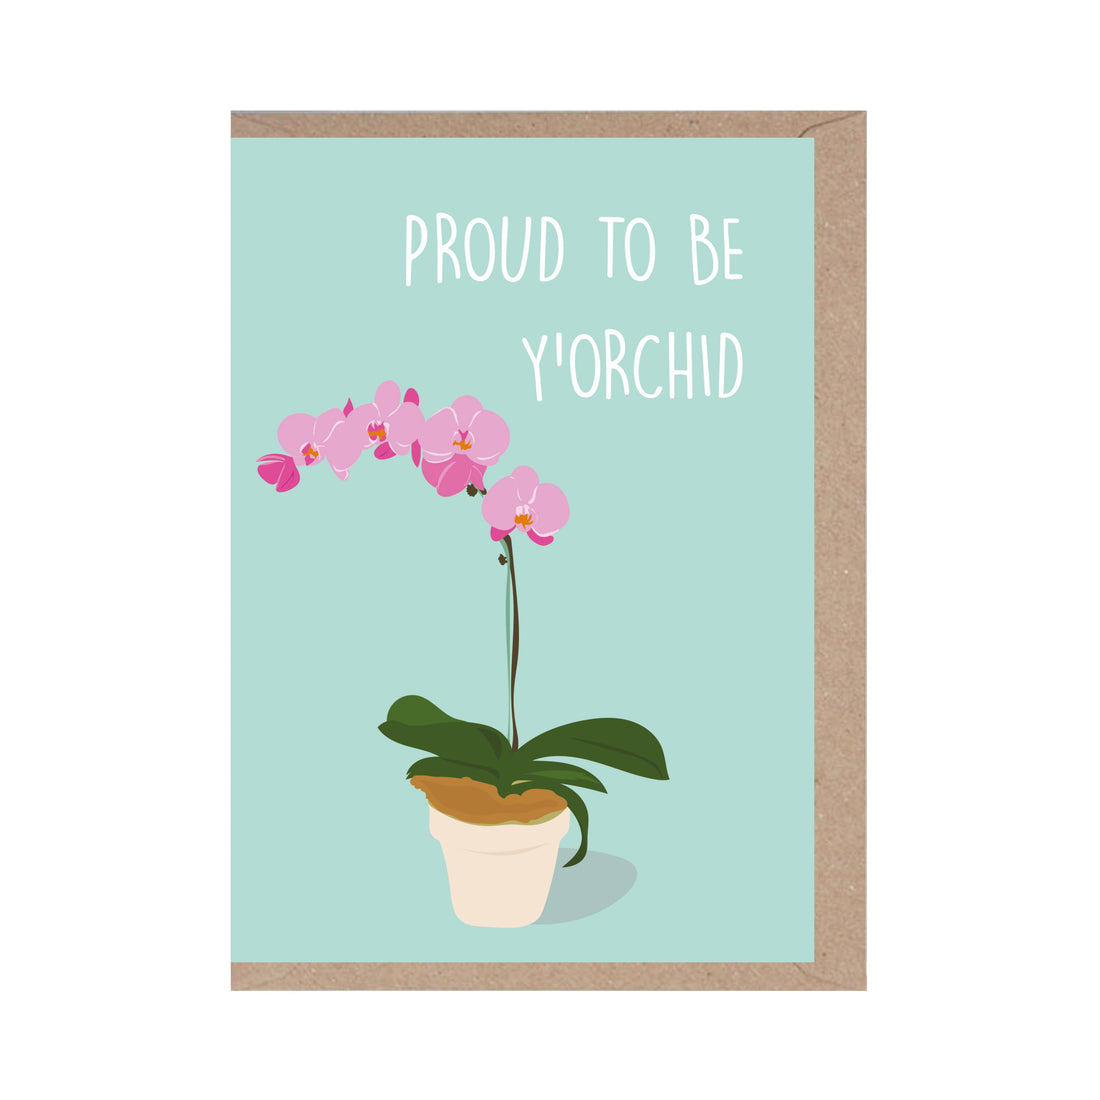 Proud of Y’Orchid